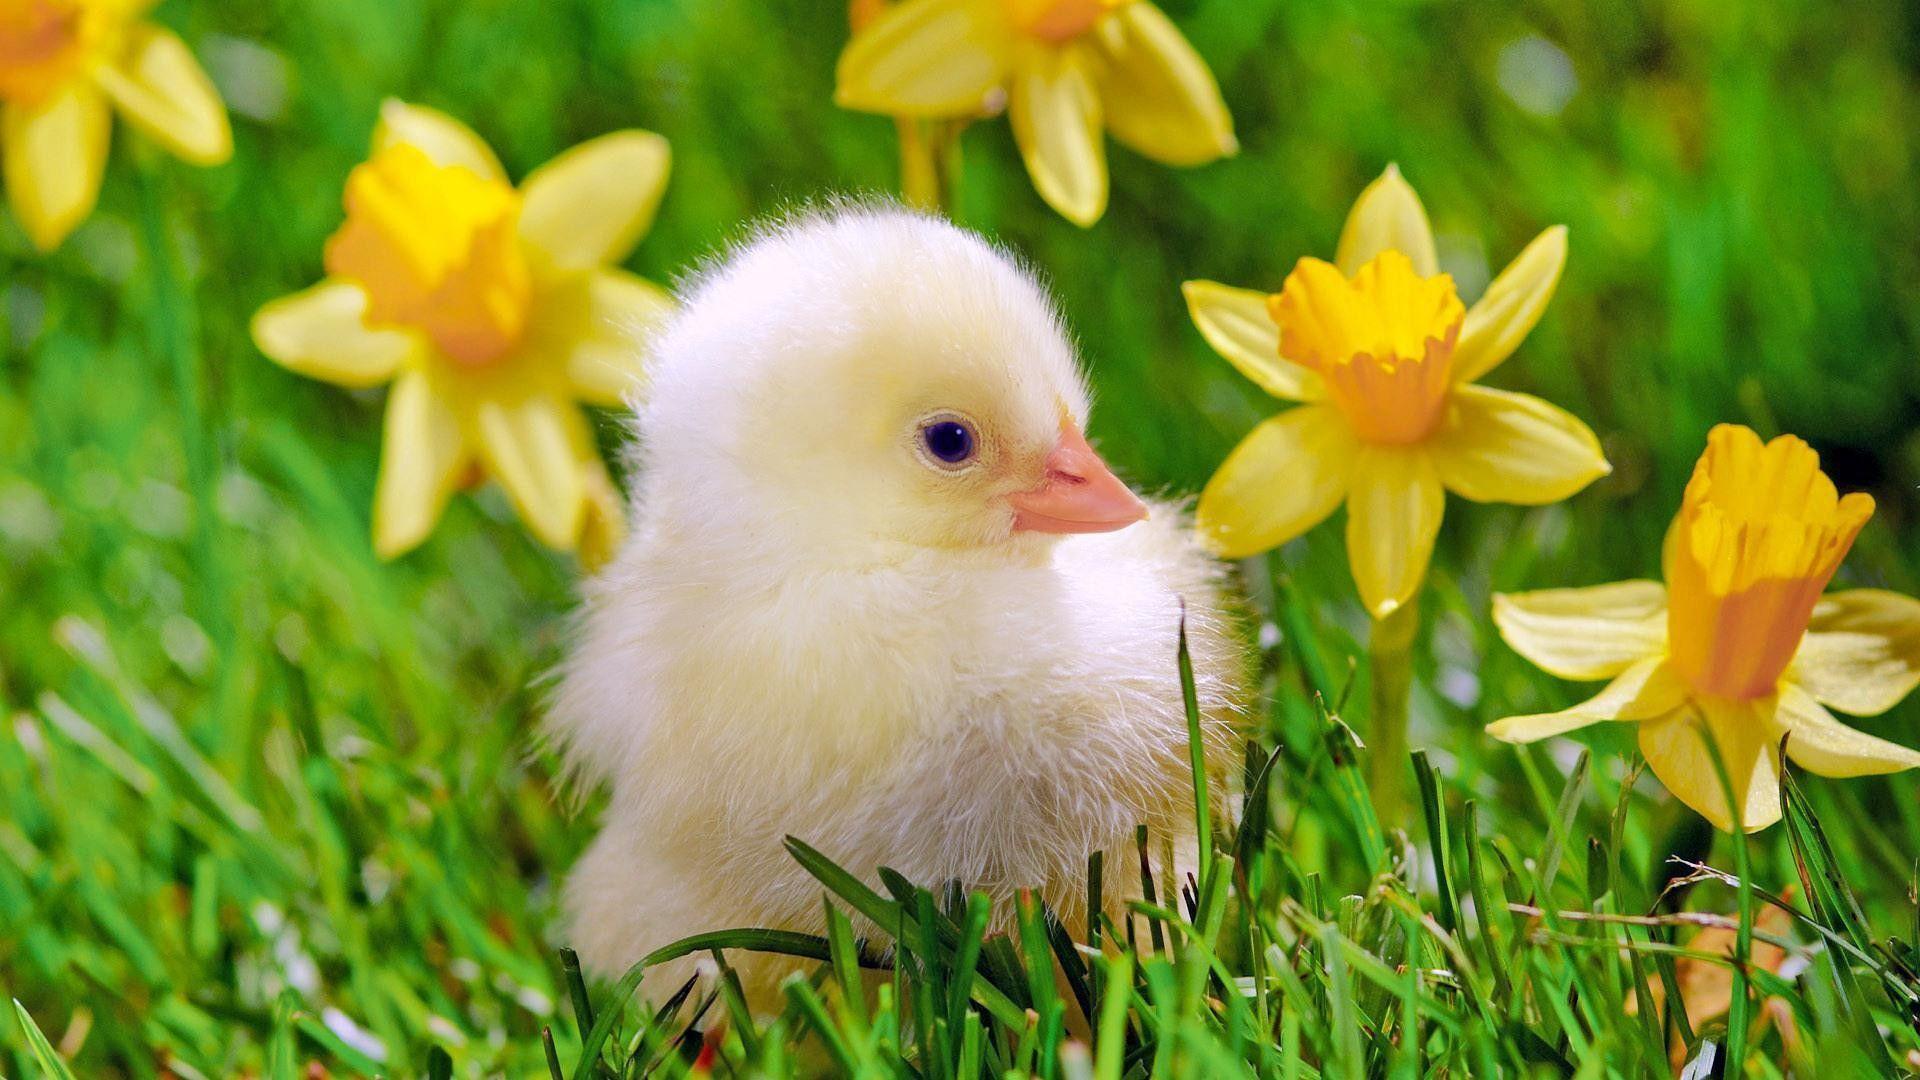 Chick Wallpaper For Pc 4k Download, Chick, Animal